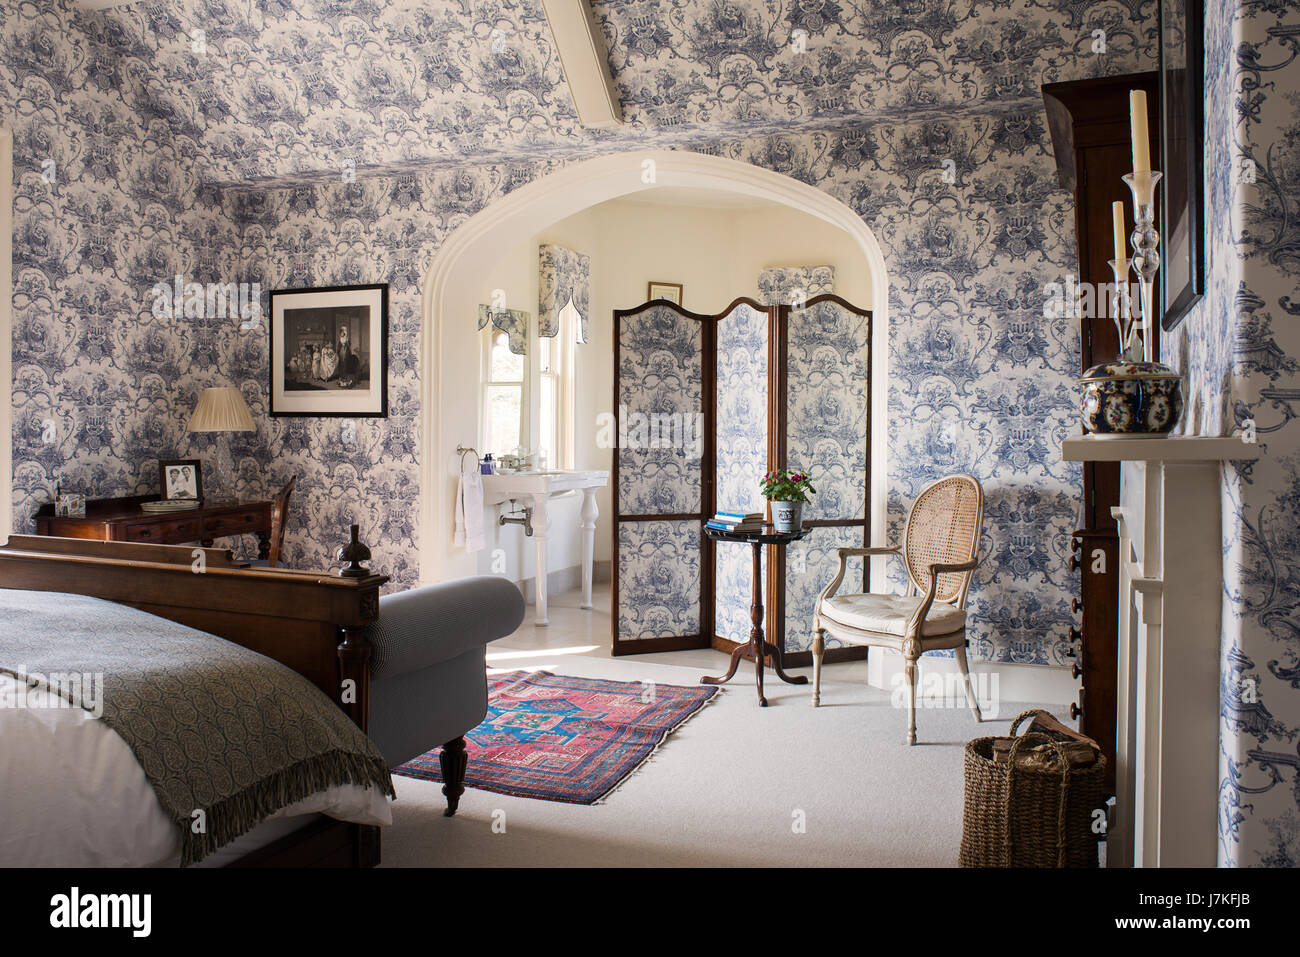 Large ensuite bedroom with toile de jouy wallpaper and matching folding screen. Stock Photo